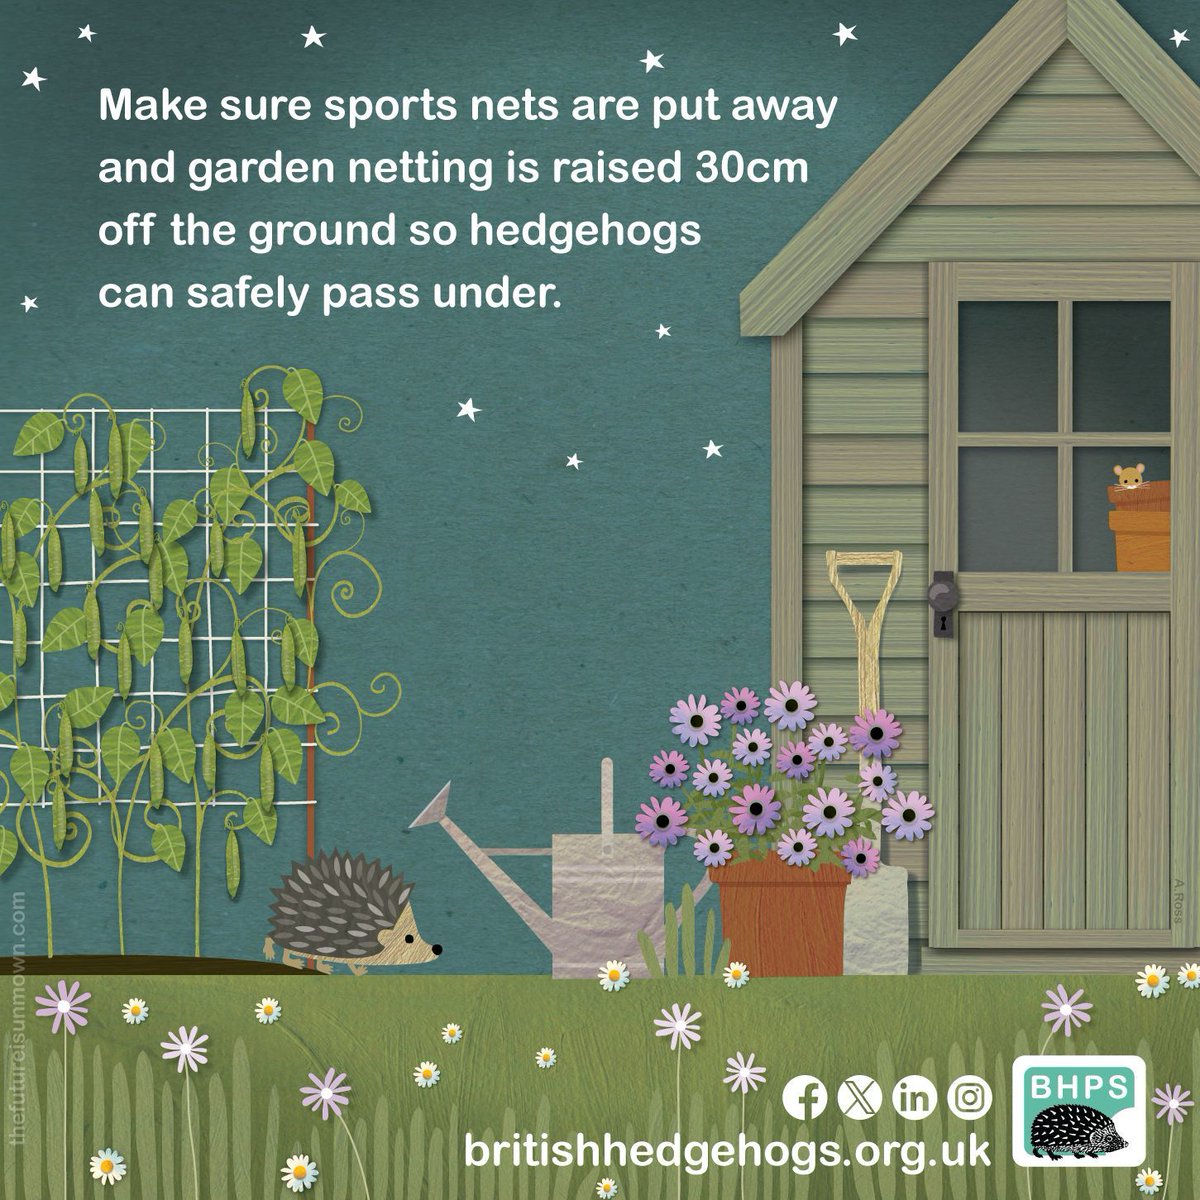 Did you know that #hedgehogs can get caught in sports nets & garden netting? #WelcomeWildlife with this handy tip designed & donated by @TFIUnmown! 🦔 🥅 🪴 Please #ShareToMakeAware during #HedgehogWeek